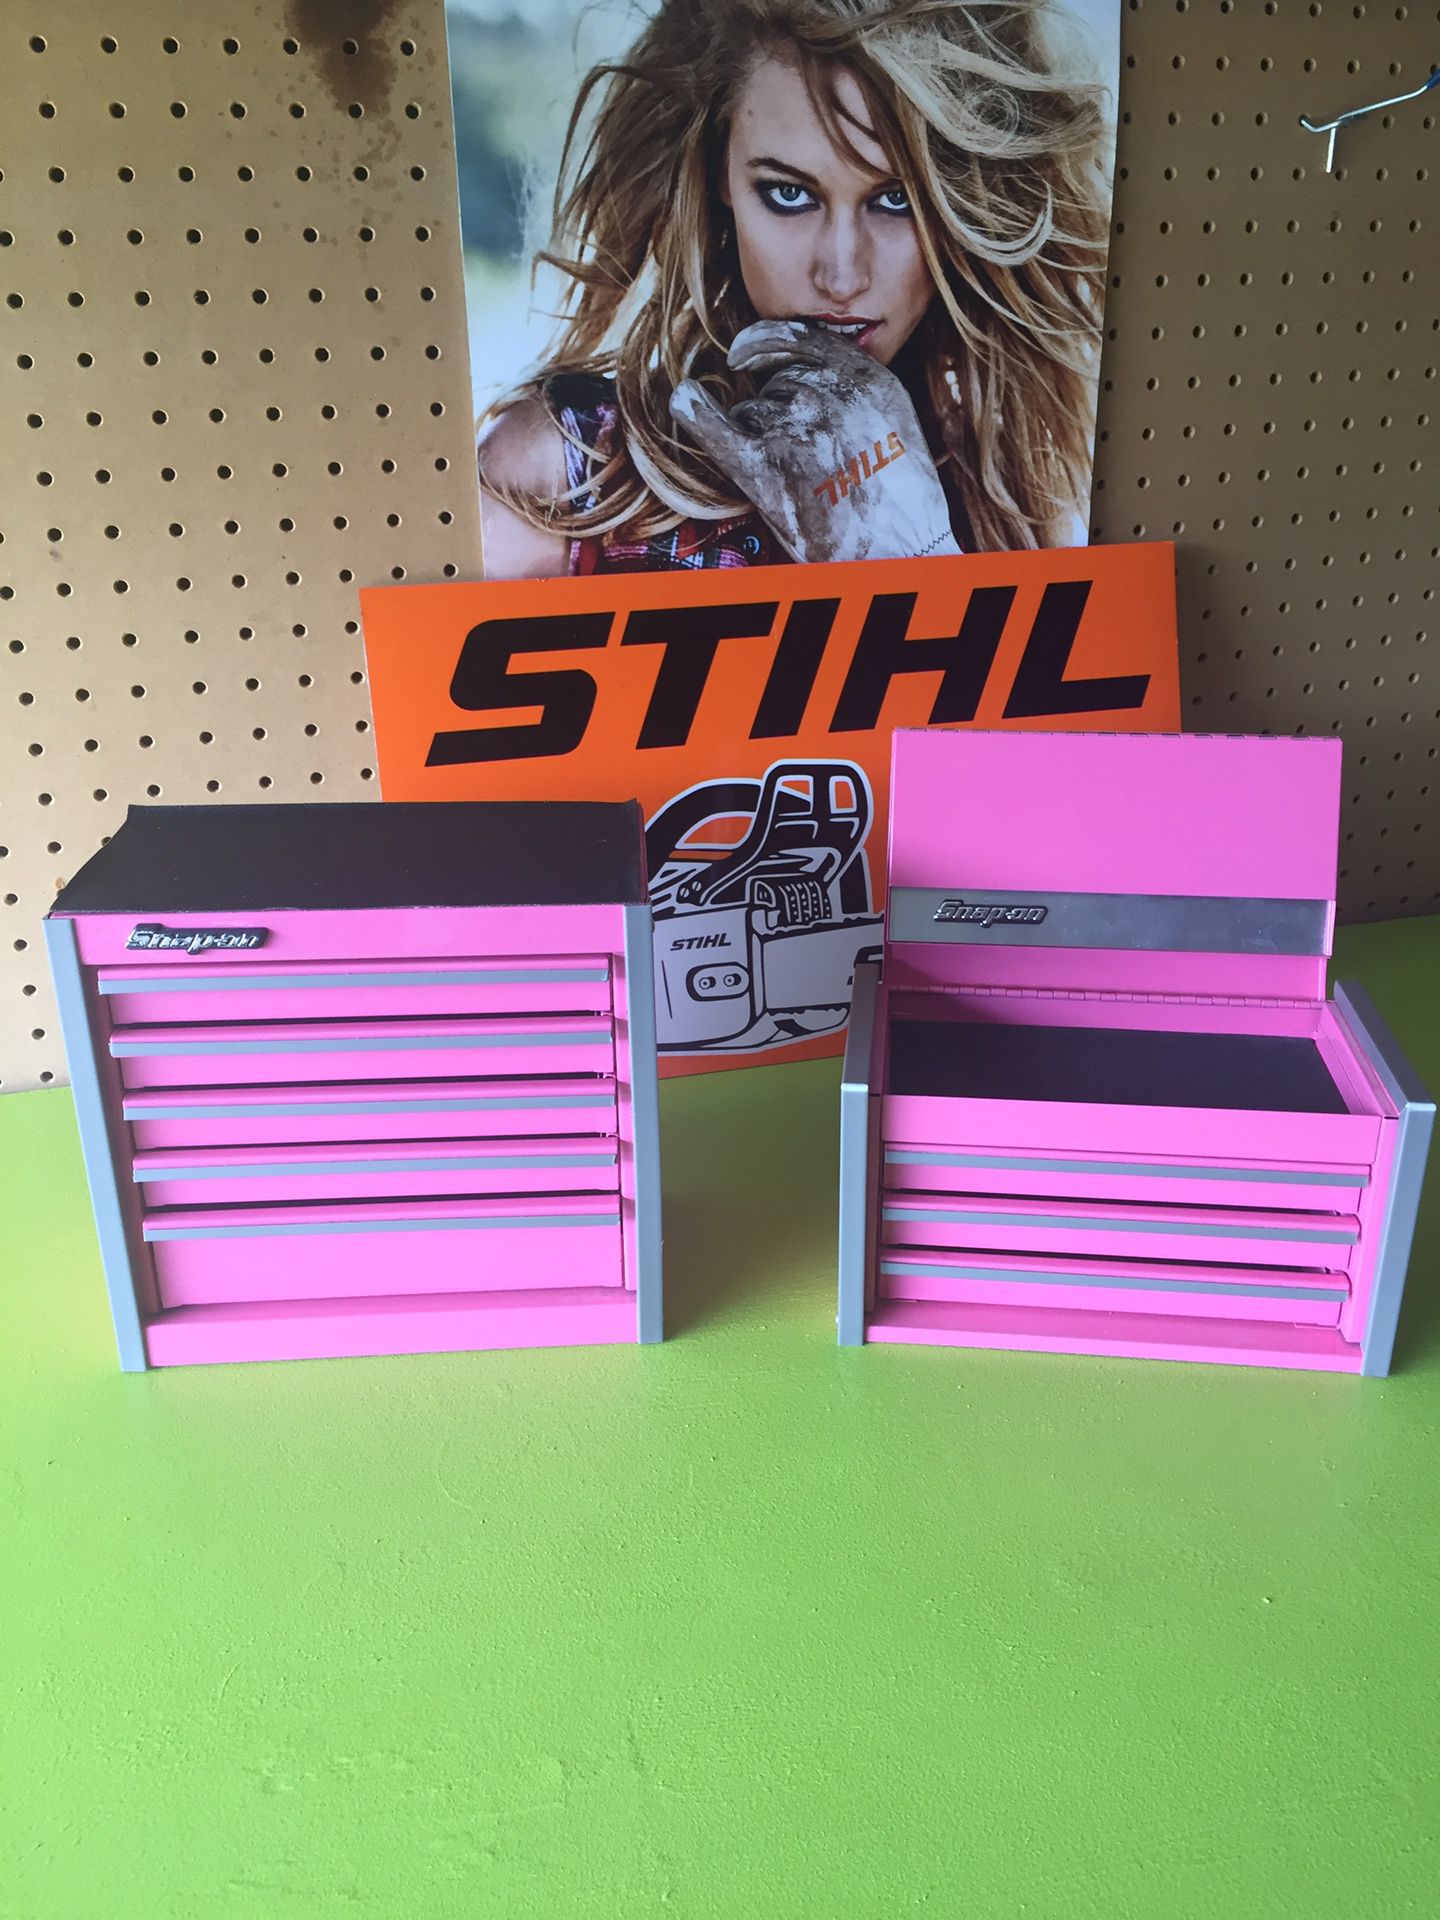 Snap on Pink mini-micro top chest tool box Rare limited edition (like new)